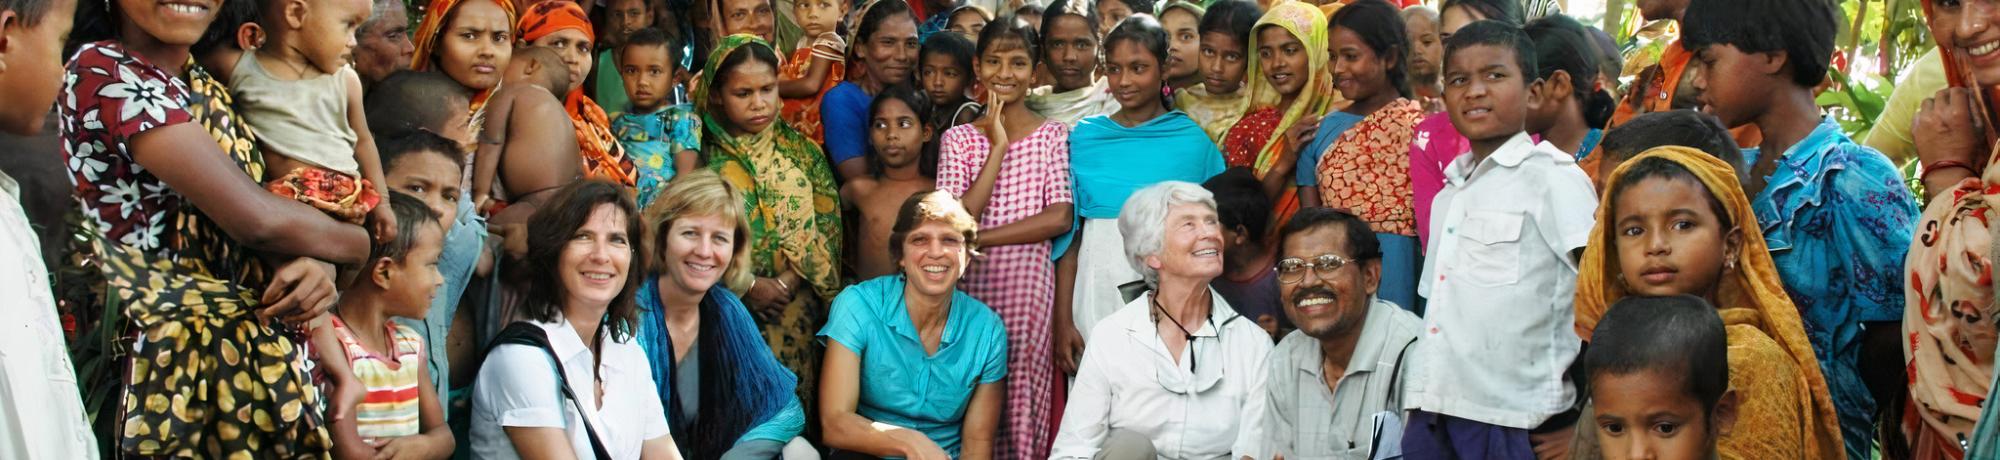 Dr. Ronald with Bangladeshi villagers